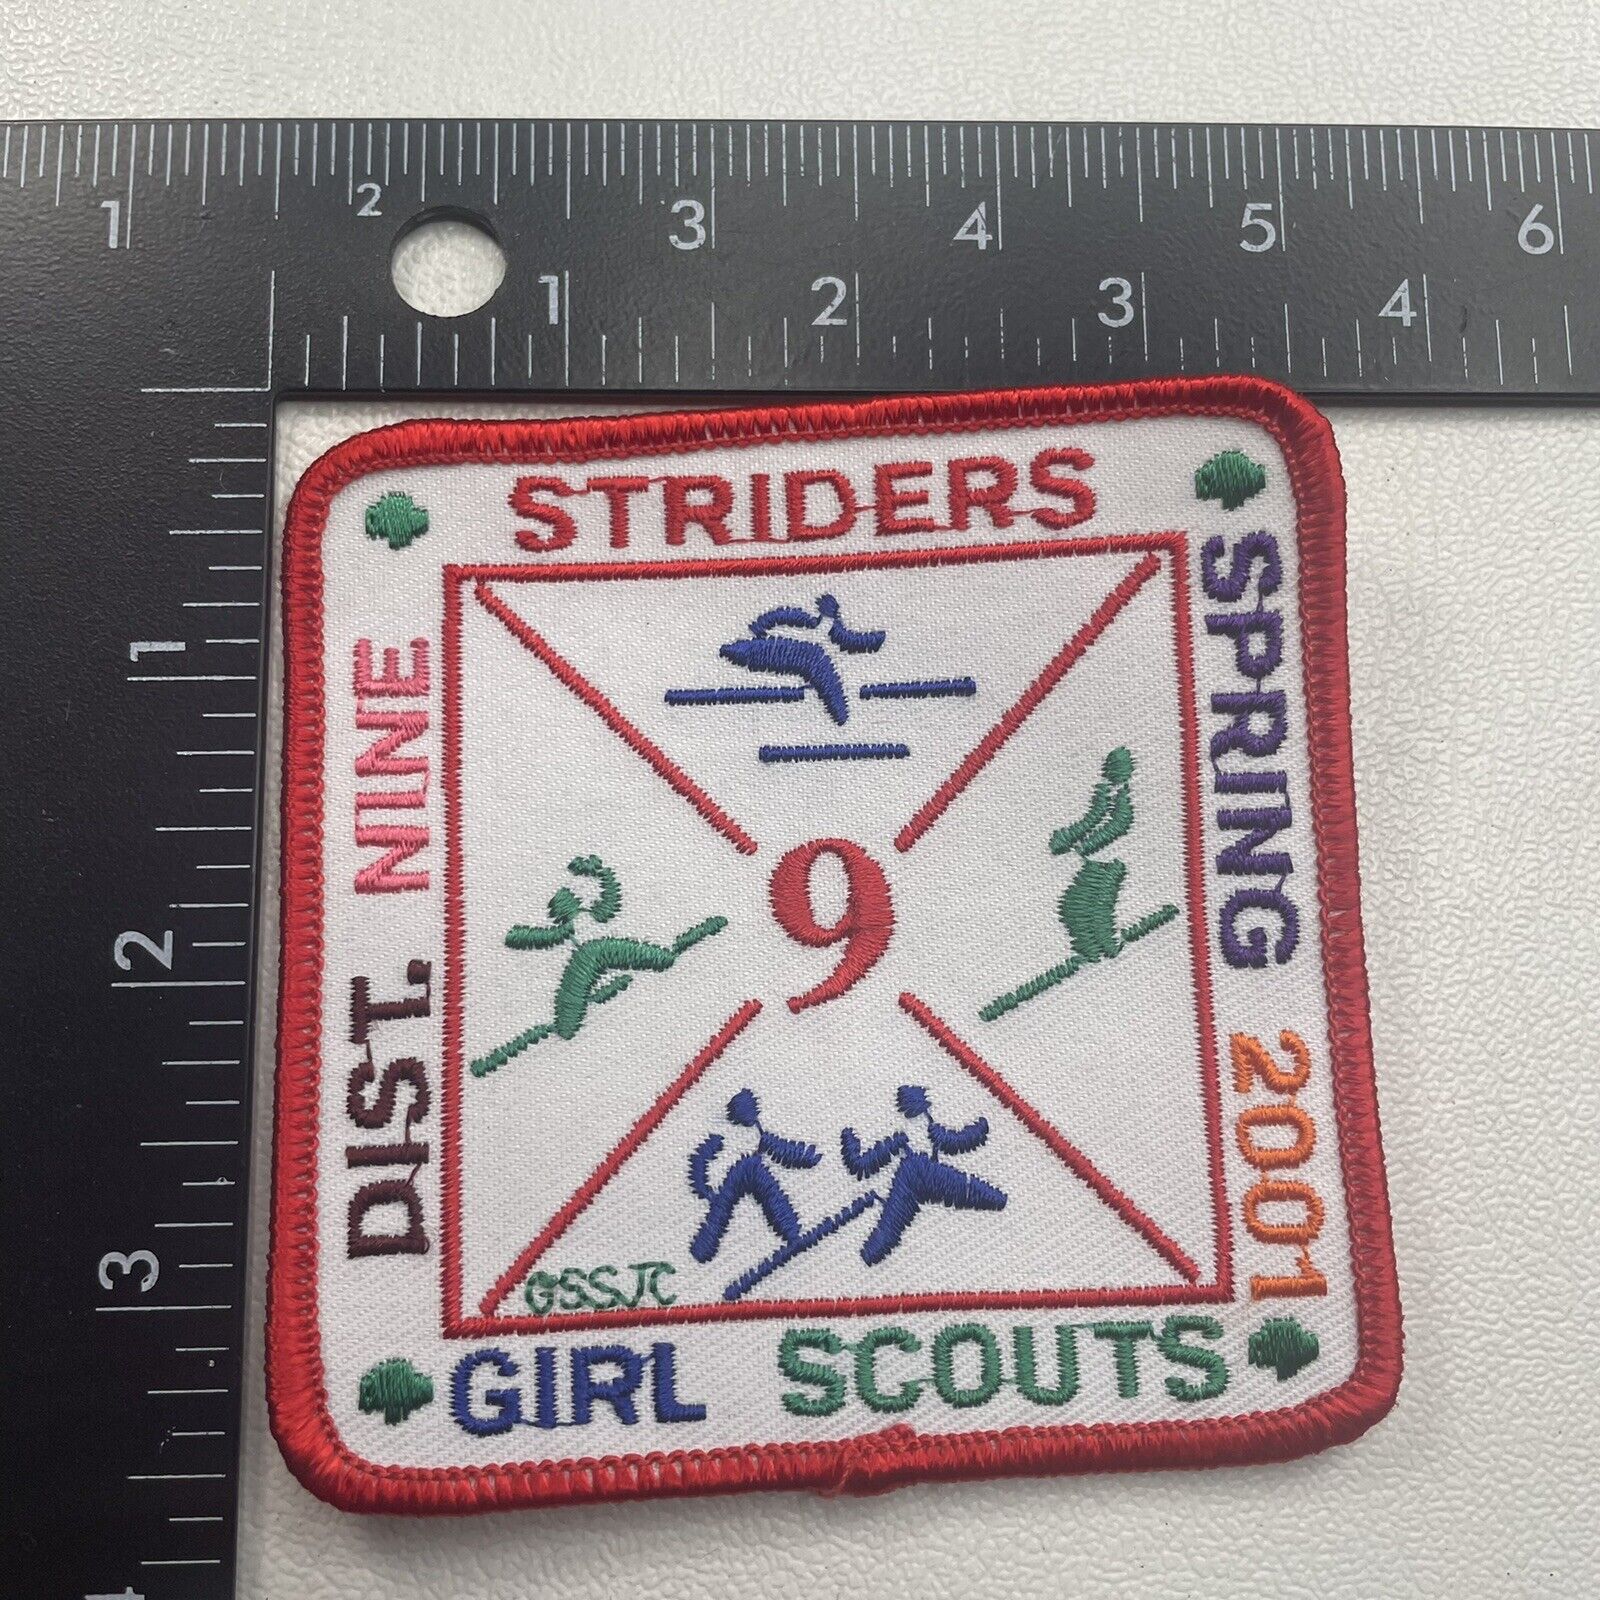 2001 Girl Scouts Dist. 9 Striders Patch (Snow Ski Run & More) 20WB